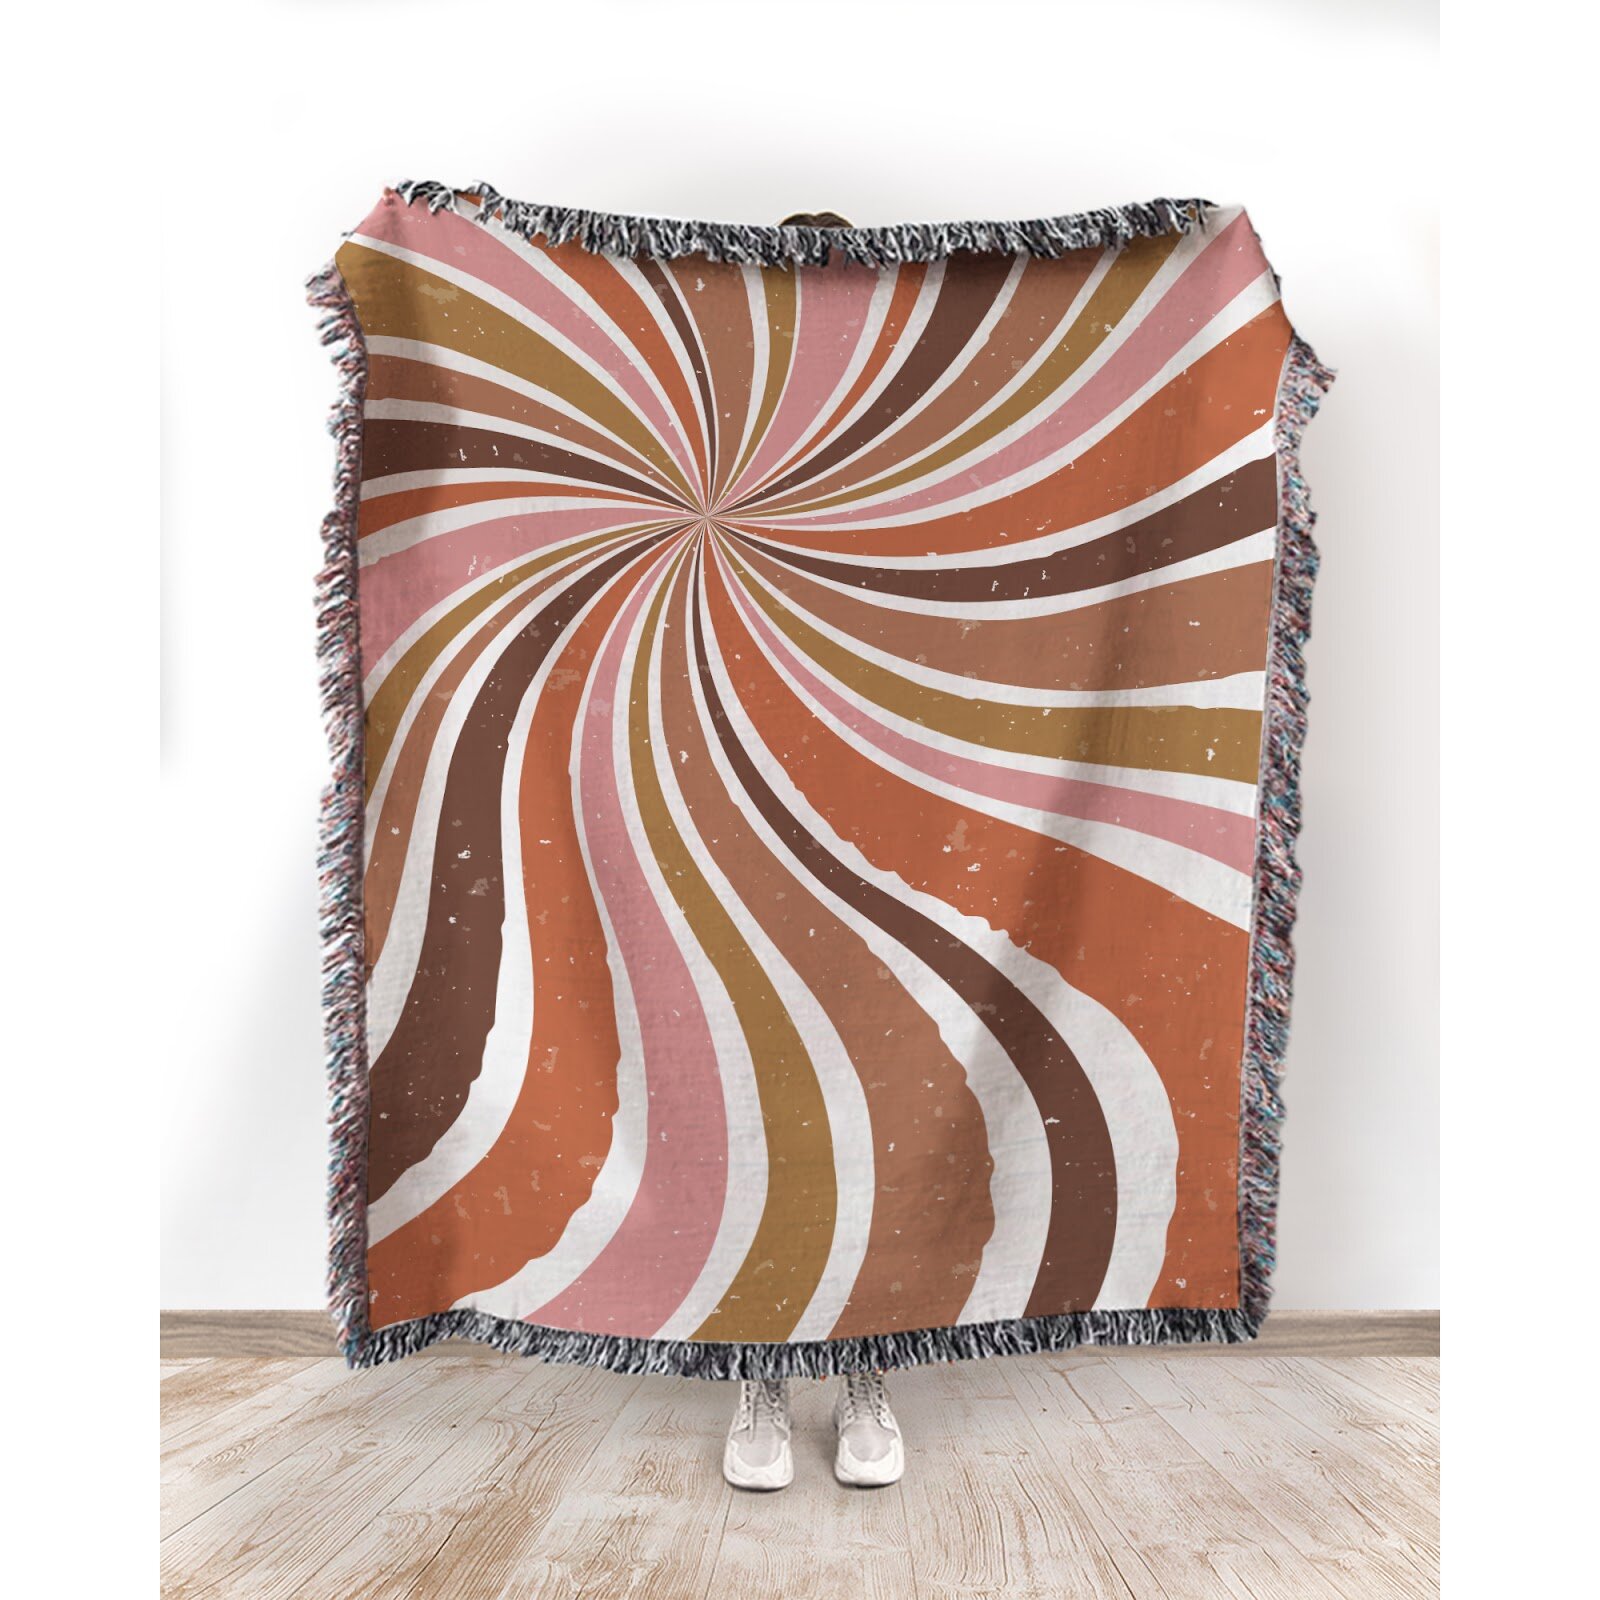 Super Soft Microfleece Blanket with Moderate Thickness can be Used in All seasons60x80adult Blanket. Psychedelic Greenery ArtSoft and Warm Blanket 